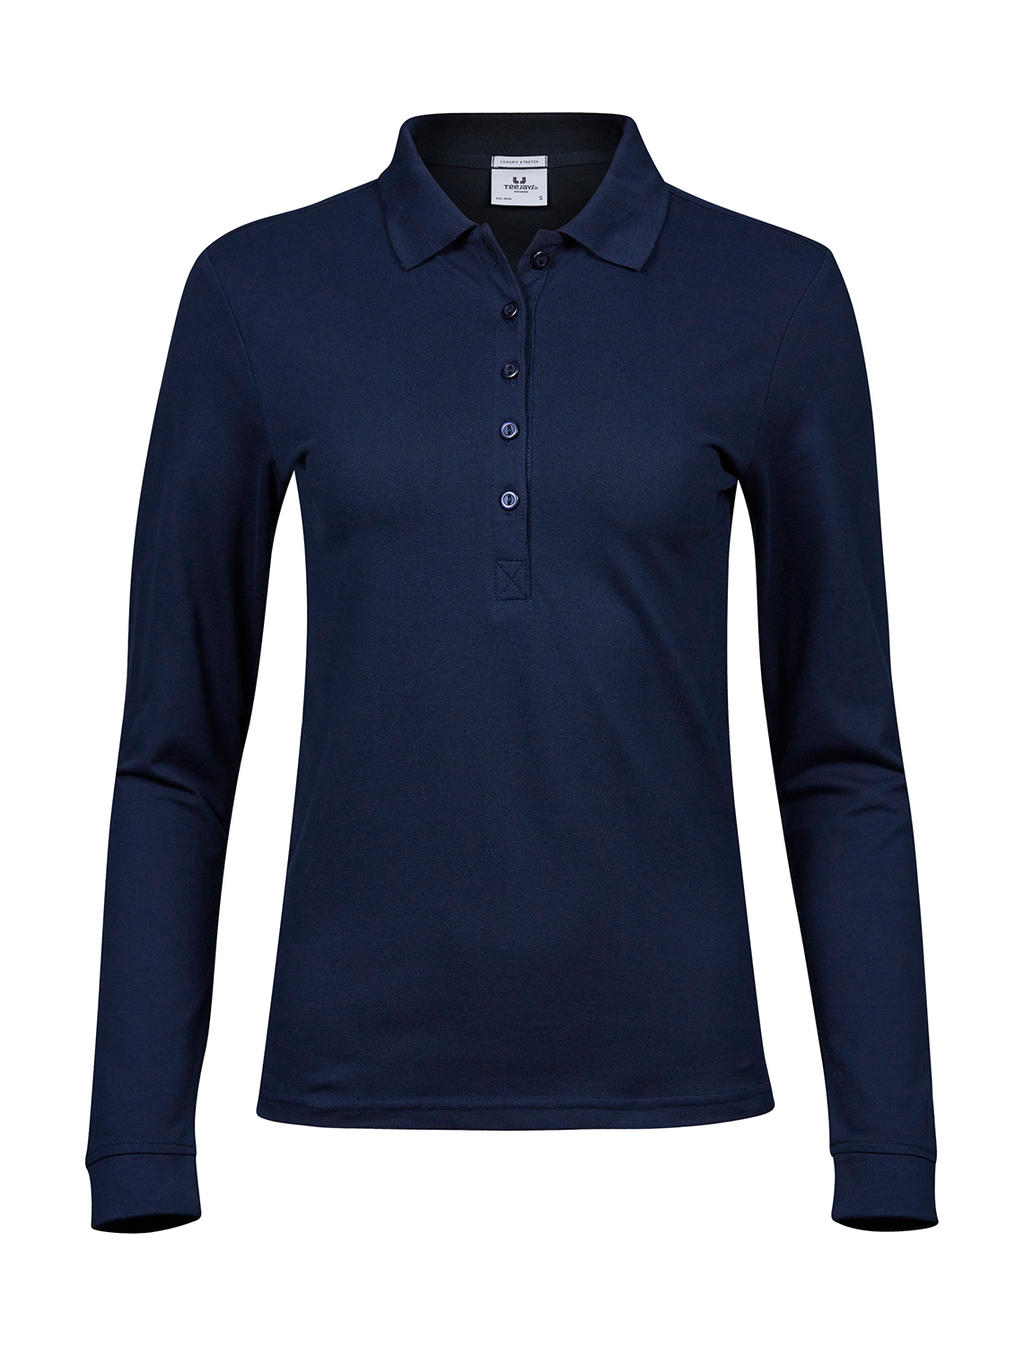  Ladies Luxury LS Stretch Polo in Farbe Navy